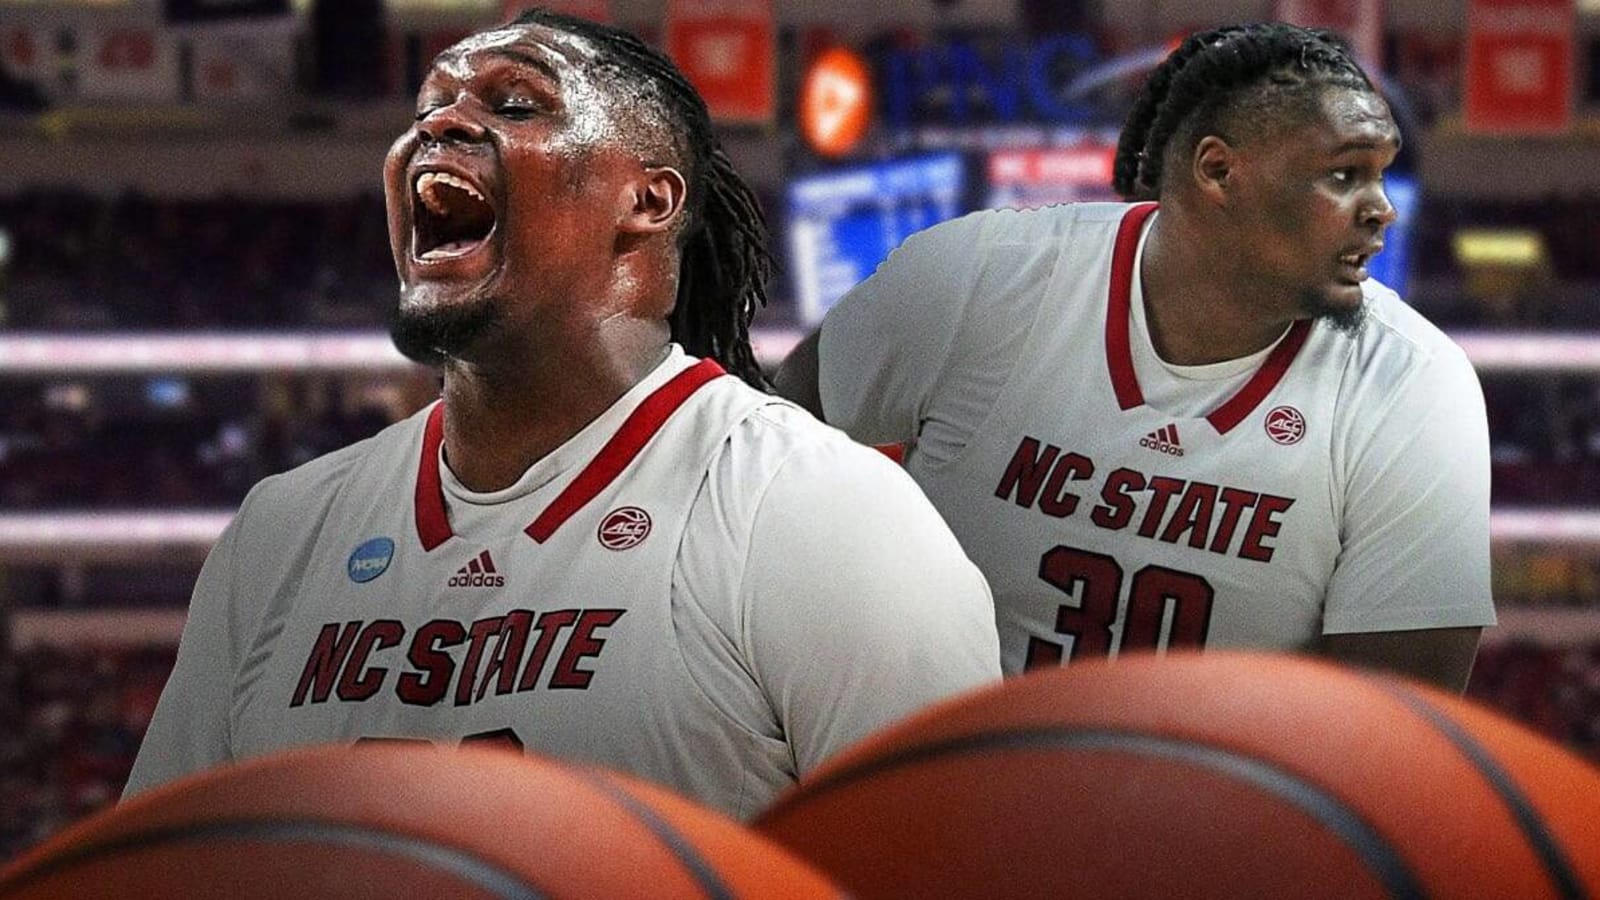 NC State basketball’s DJ Burns Jr. fires serious warning to rivals after booking Elite Eight ticket